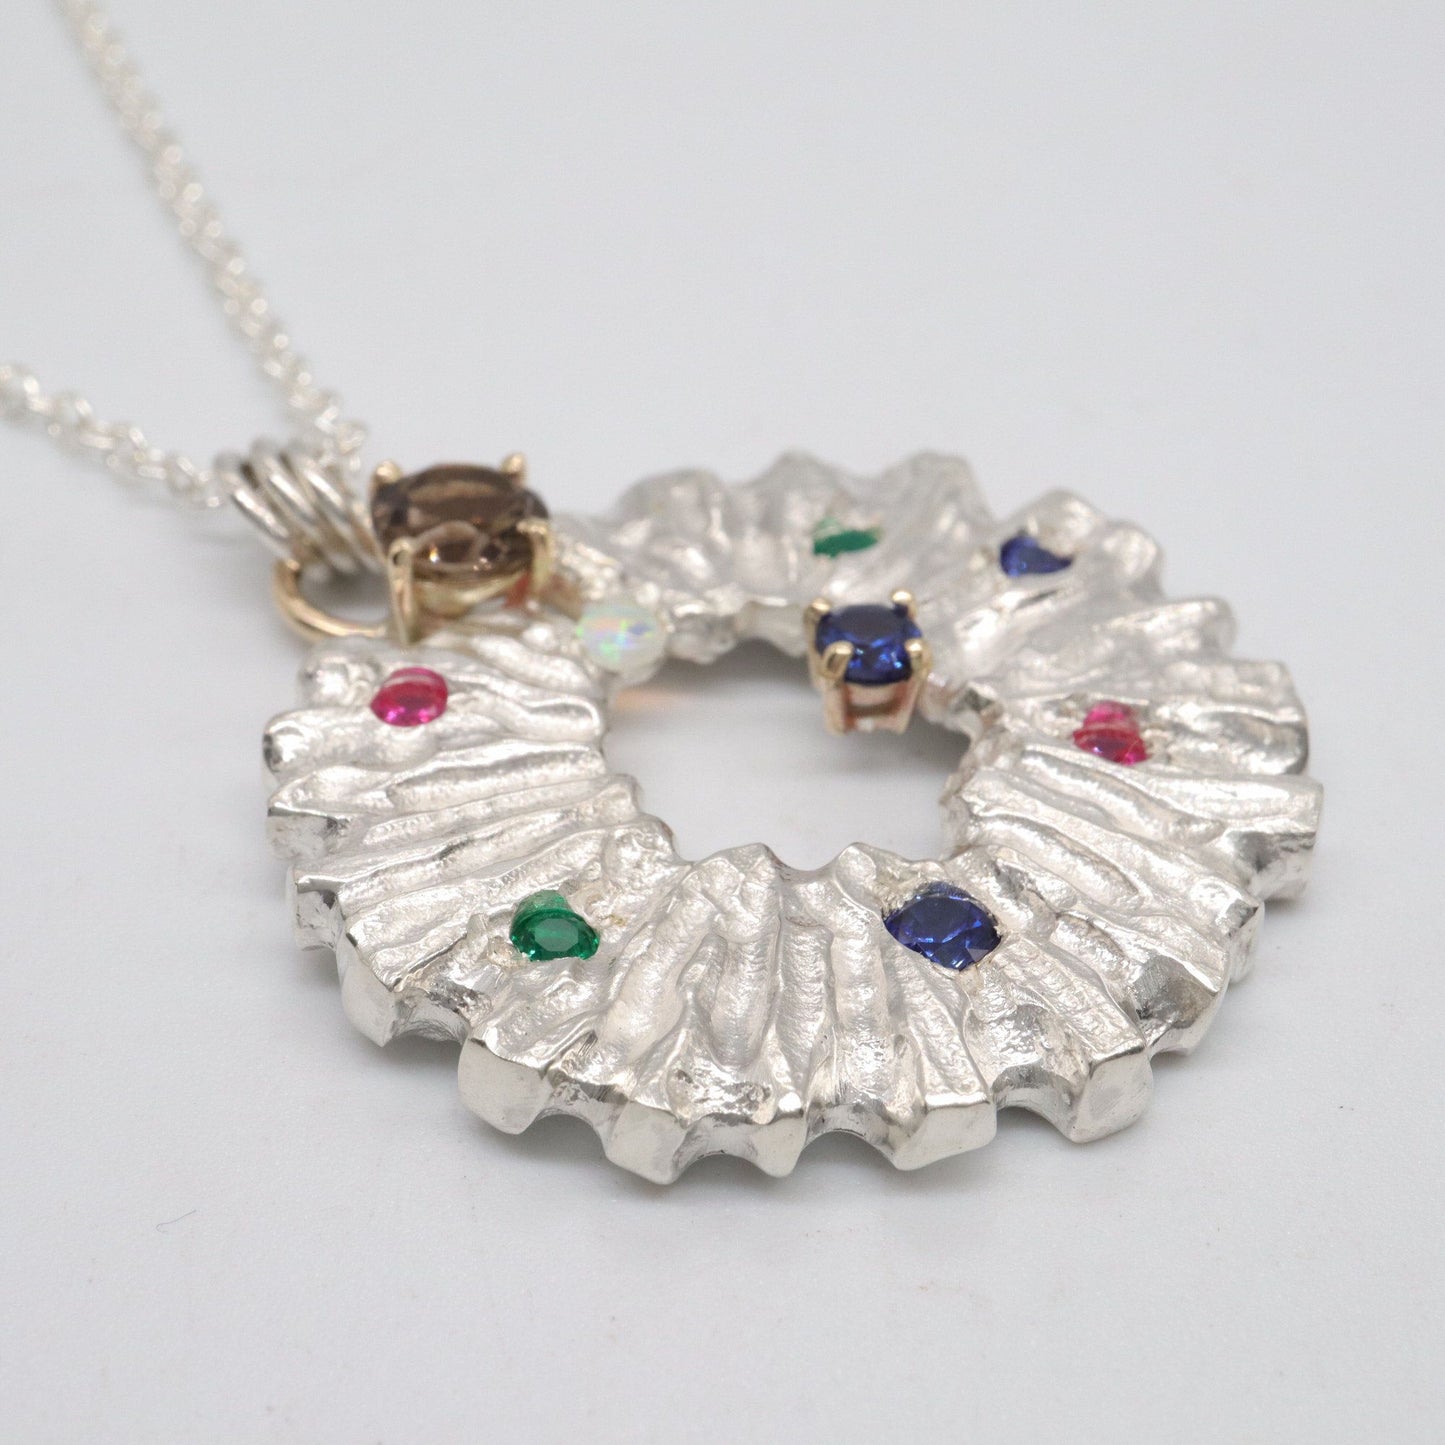 Lake Edge handmade sapphire, ruby, emerald, opal Pendant  - Fells and Lakes limited edition collection.